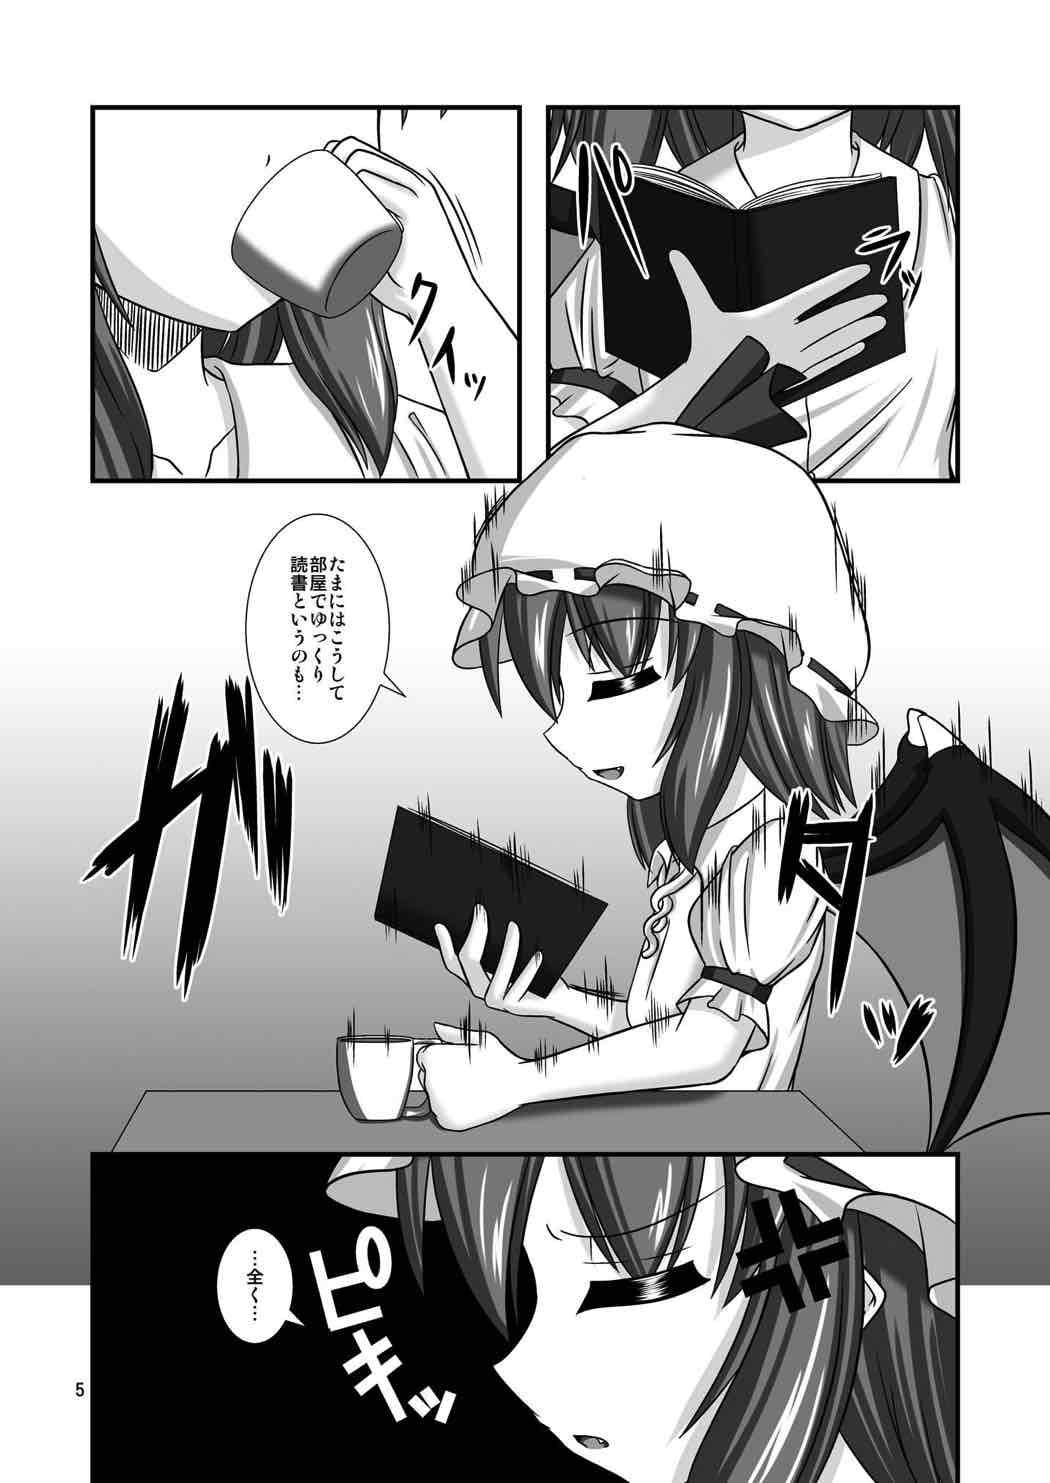 Spooning [Endless Requiem (yasha)] Touhou Do M Hoi Hoi ~Remilia Hen~ 2 (Touhou Project) [Digital] - Touhou project Squirters - Page 4